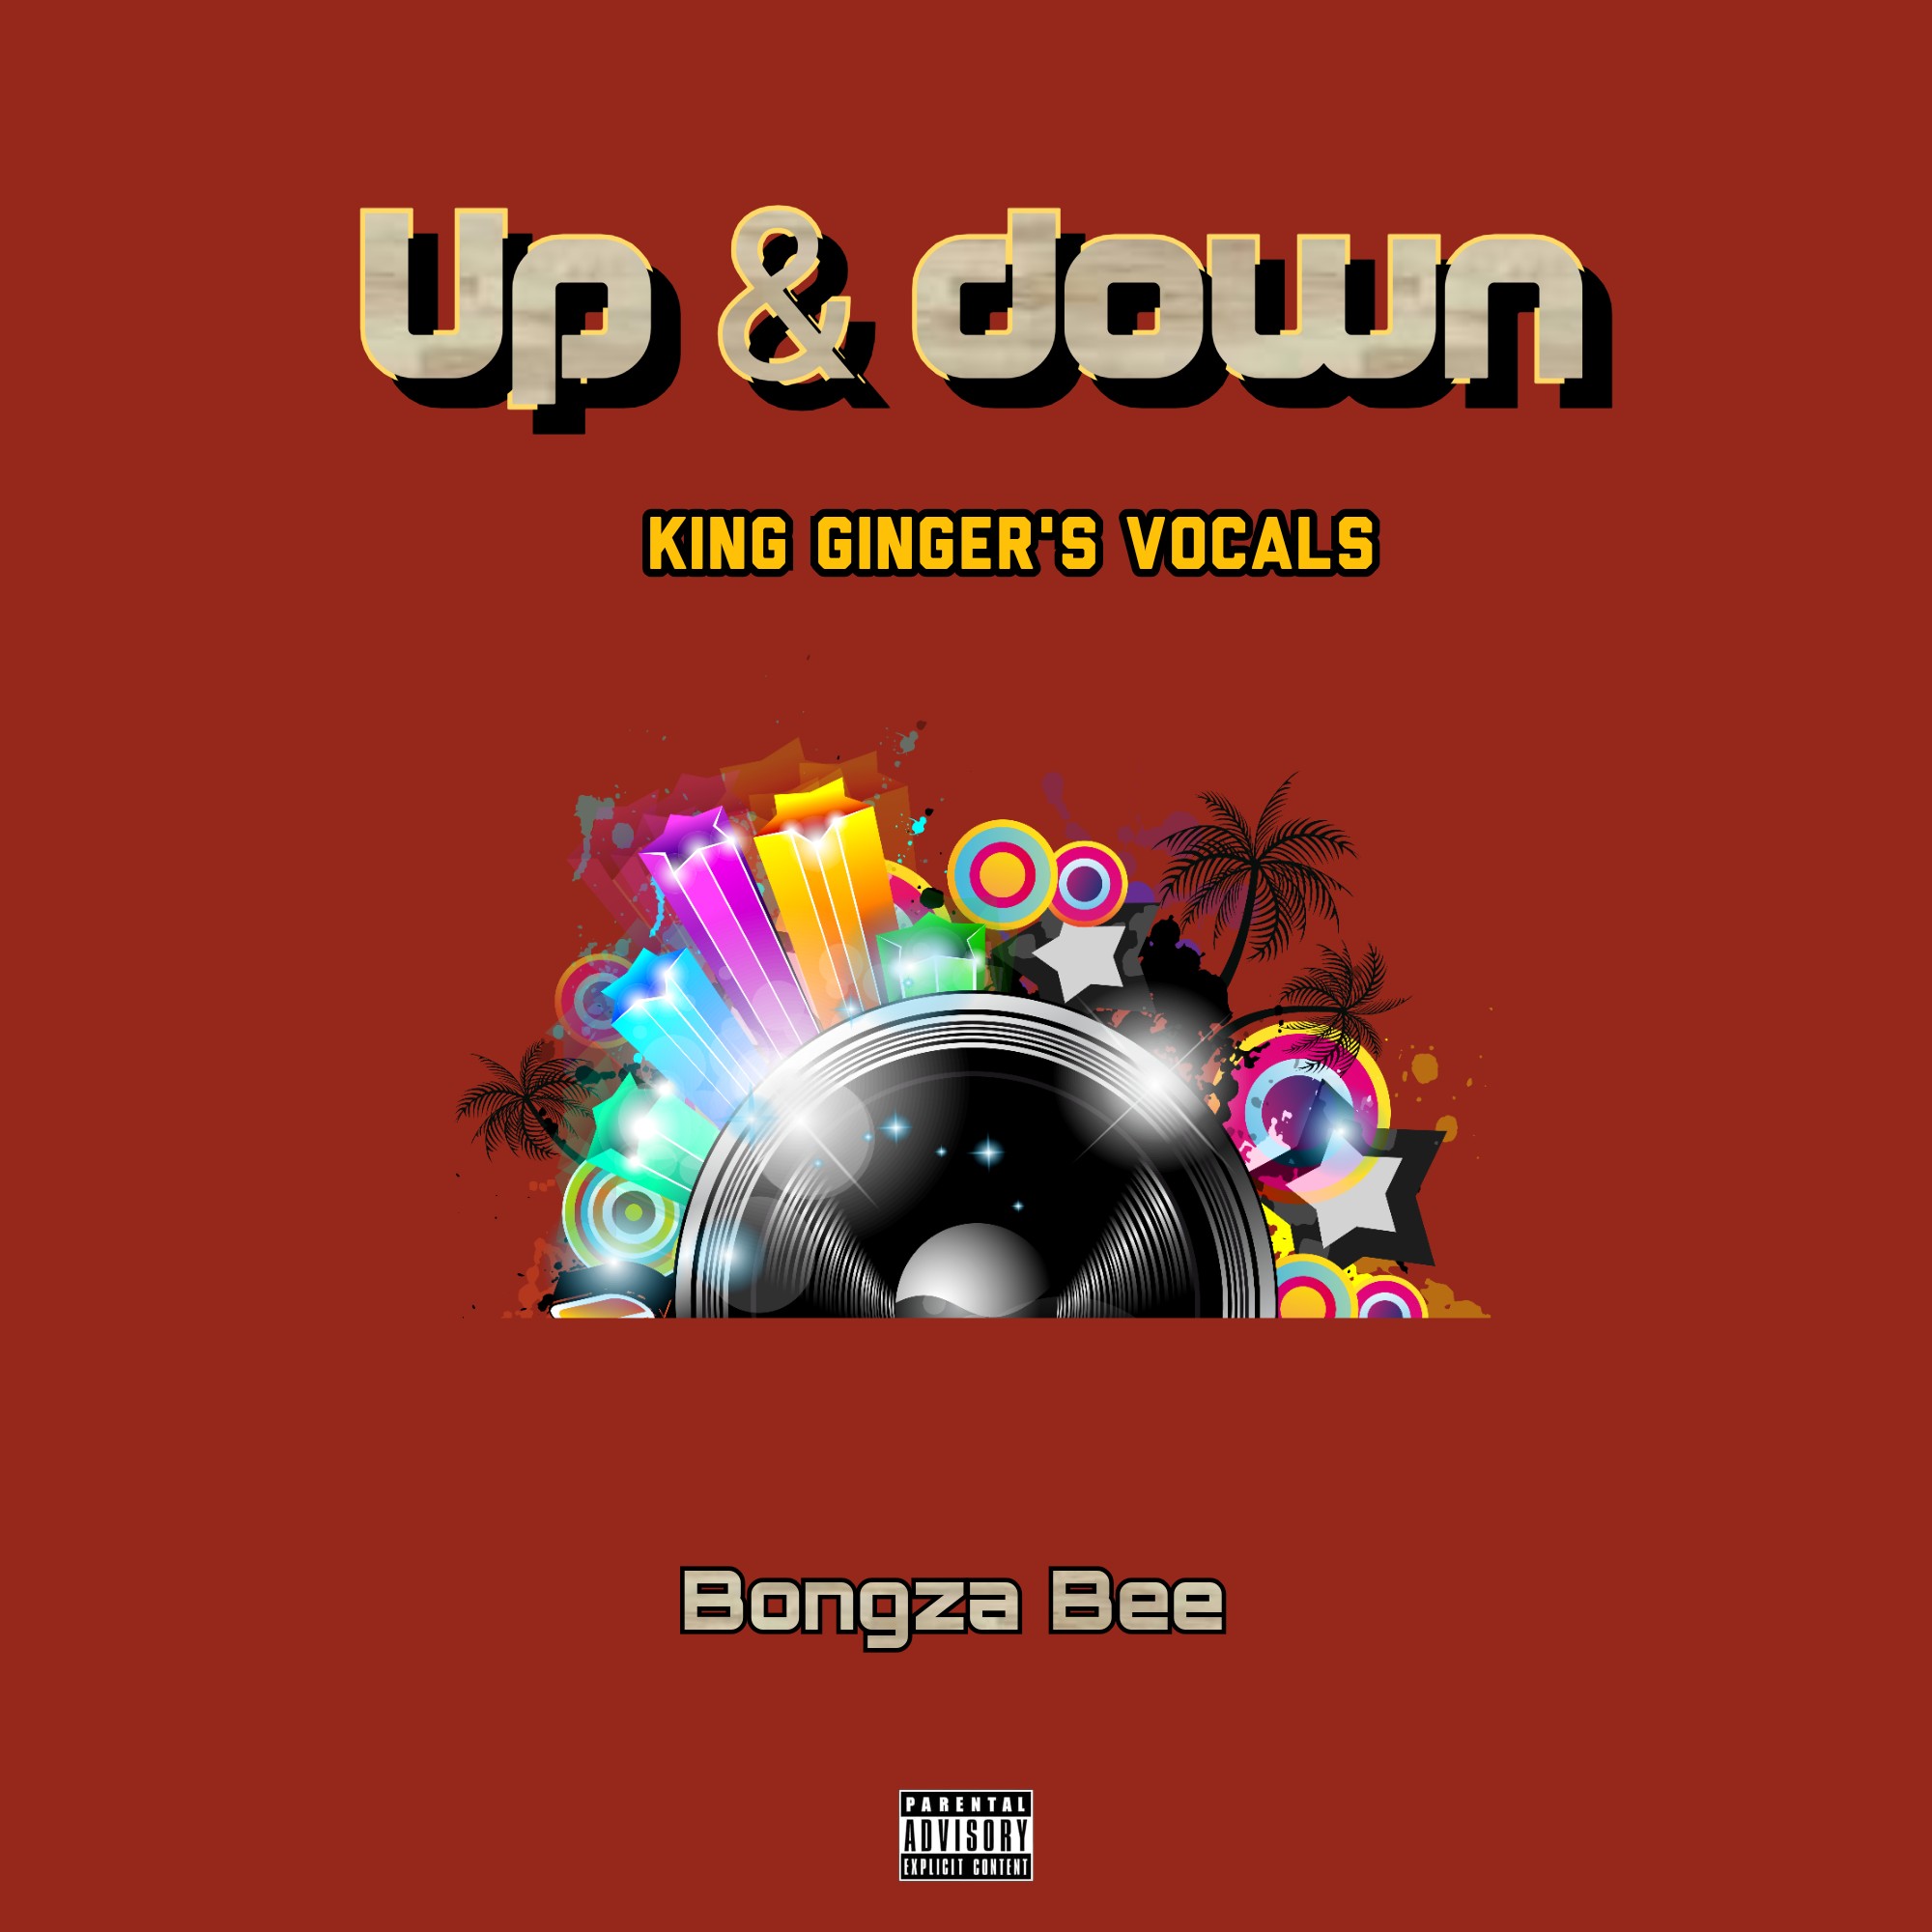 Up & down (King ginger's vocals) - Bongza Bee